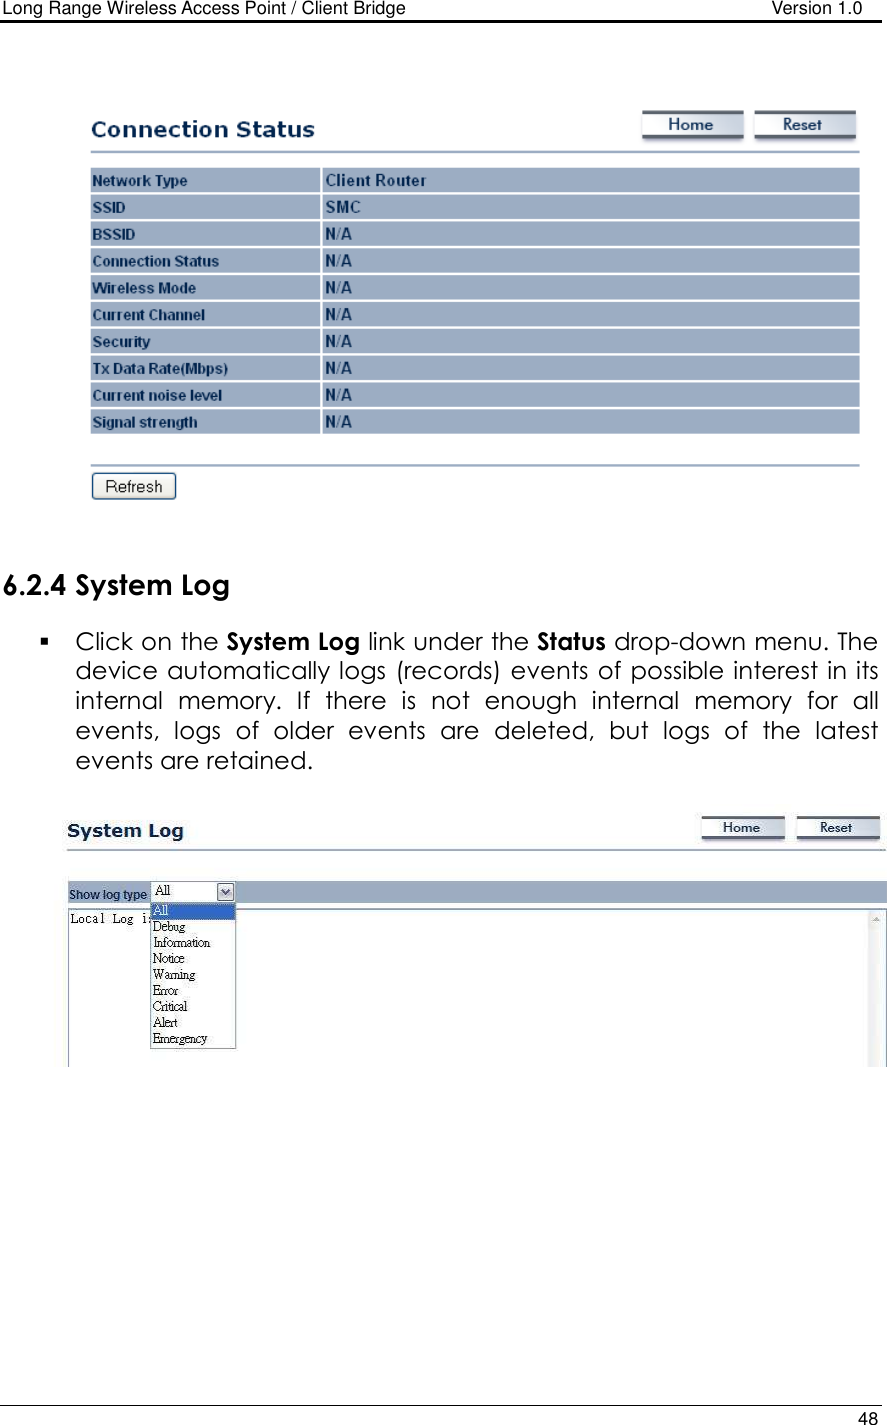 Long Range Wireless Access Point / Client Bridge                                   Version 1.0    48      6.2.4 System Log  Click on the System Log link under the Status drop-down menu. The device automatically logs (records) events of possible interest in its internal  memory.  If  there  is  not  enough  internal  memory  for  all events,  logs  of  older  events  are  deleted,  but  logs  of  the  latest events are retained.       